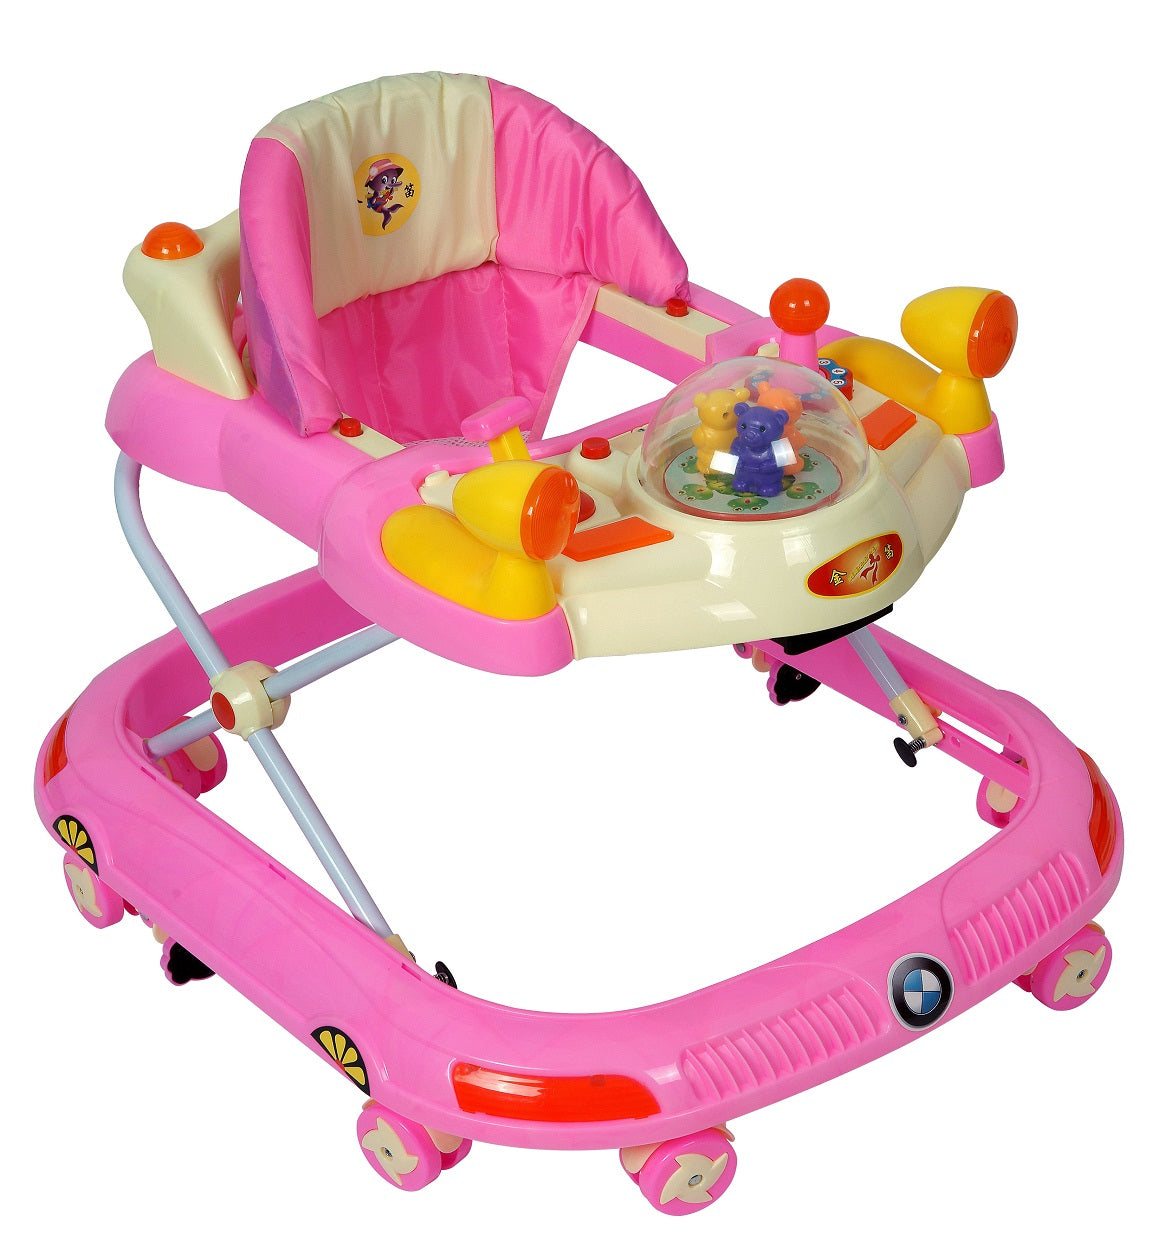 Toy, What Baby Activity Walkers Can Do For Your Child